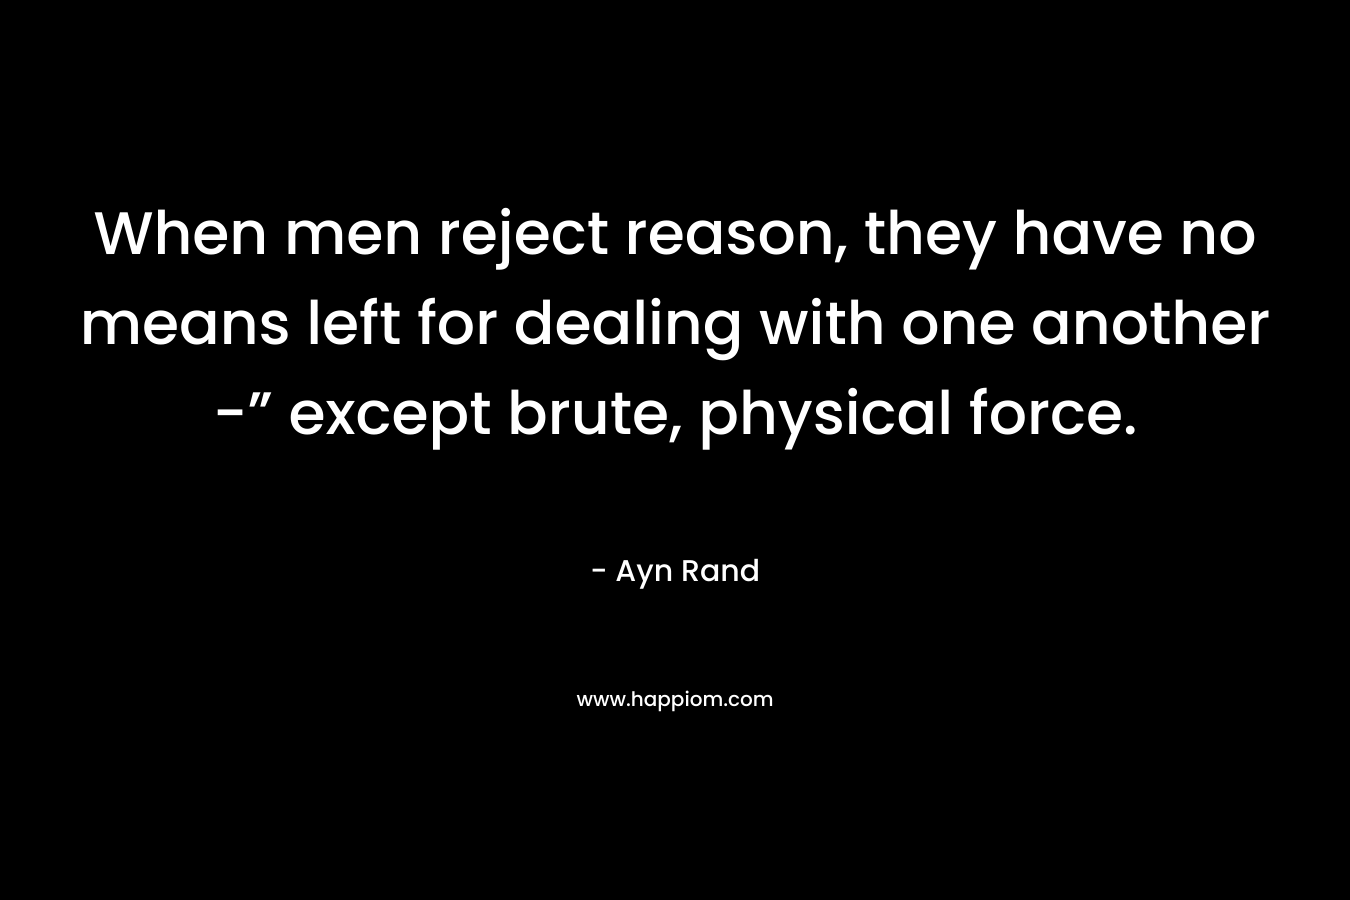 When men reject reason, they have no means left for dealing with one another -” except brute, physical force. – Ayn Rand